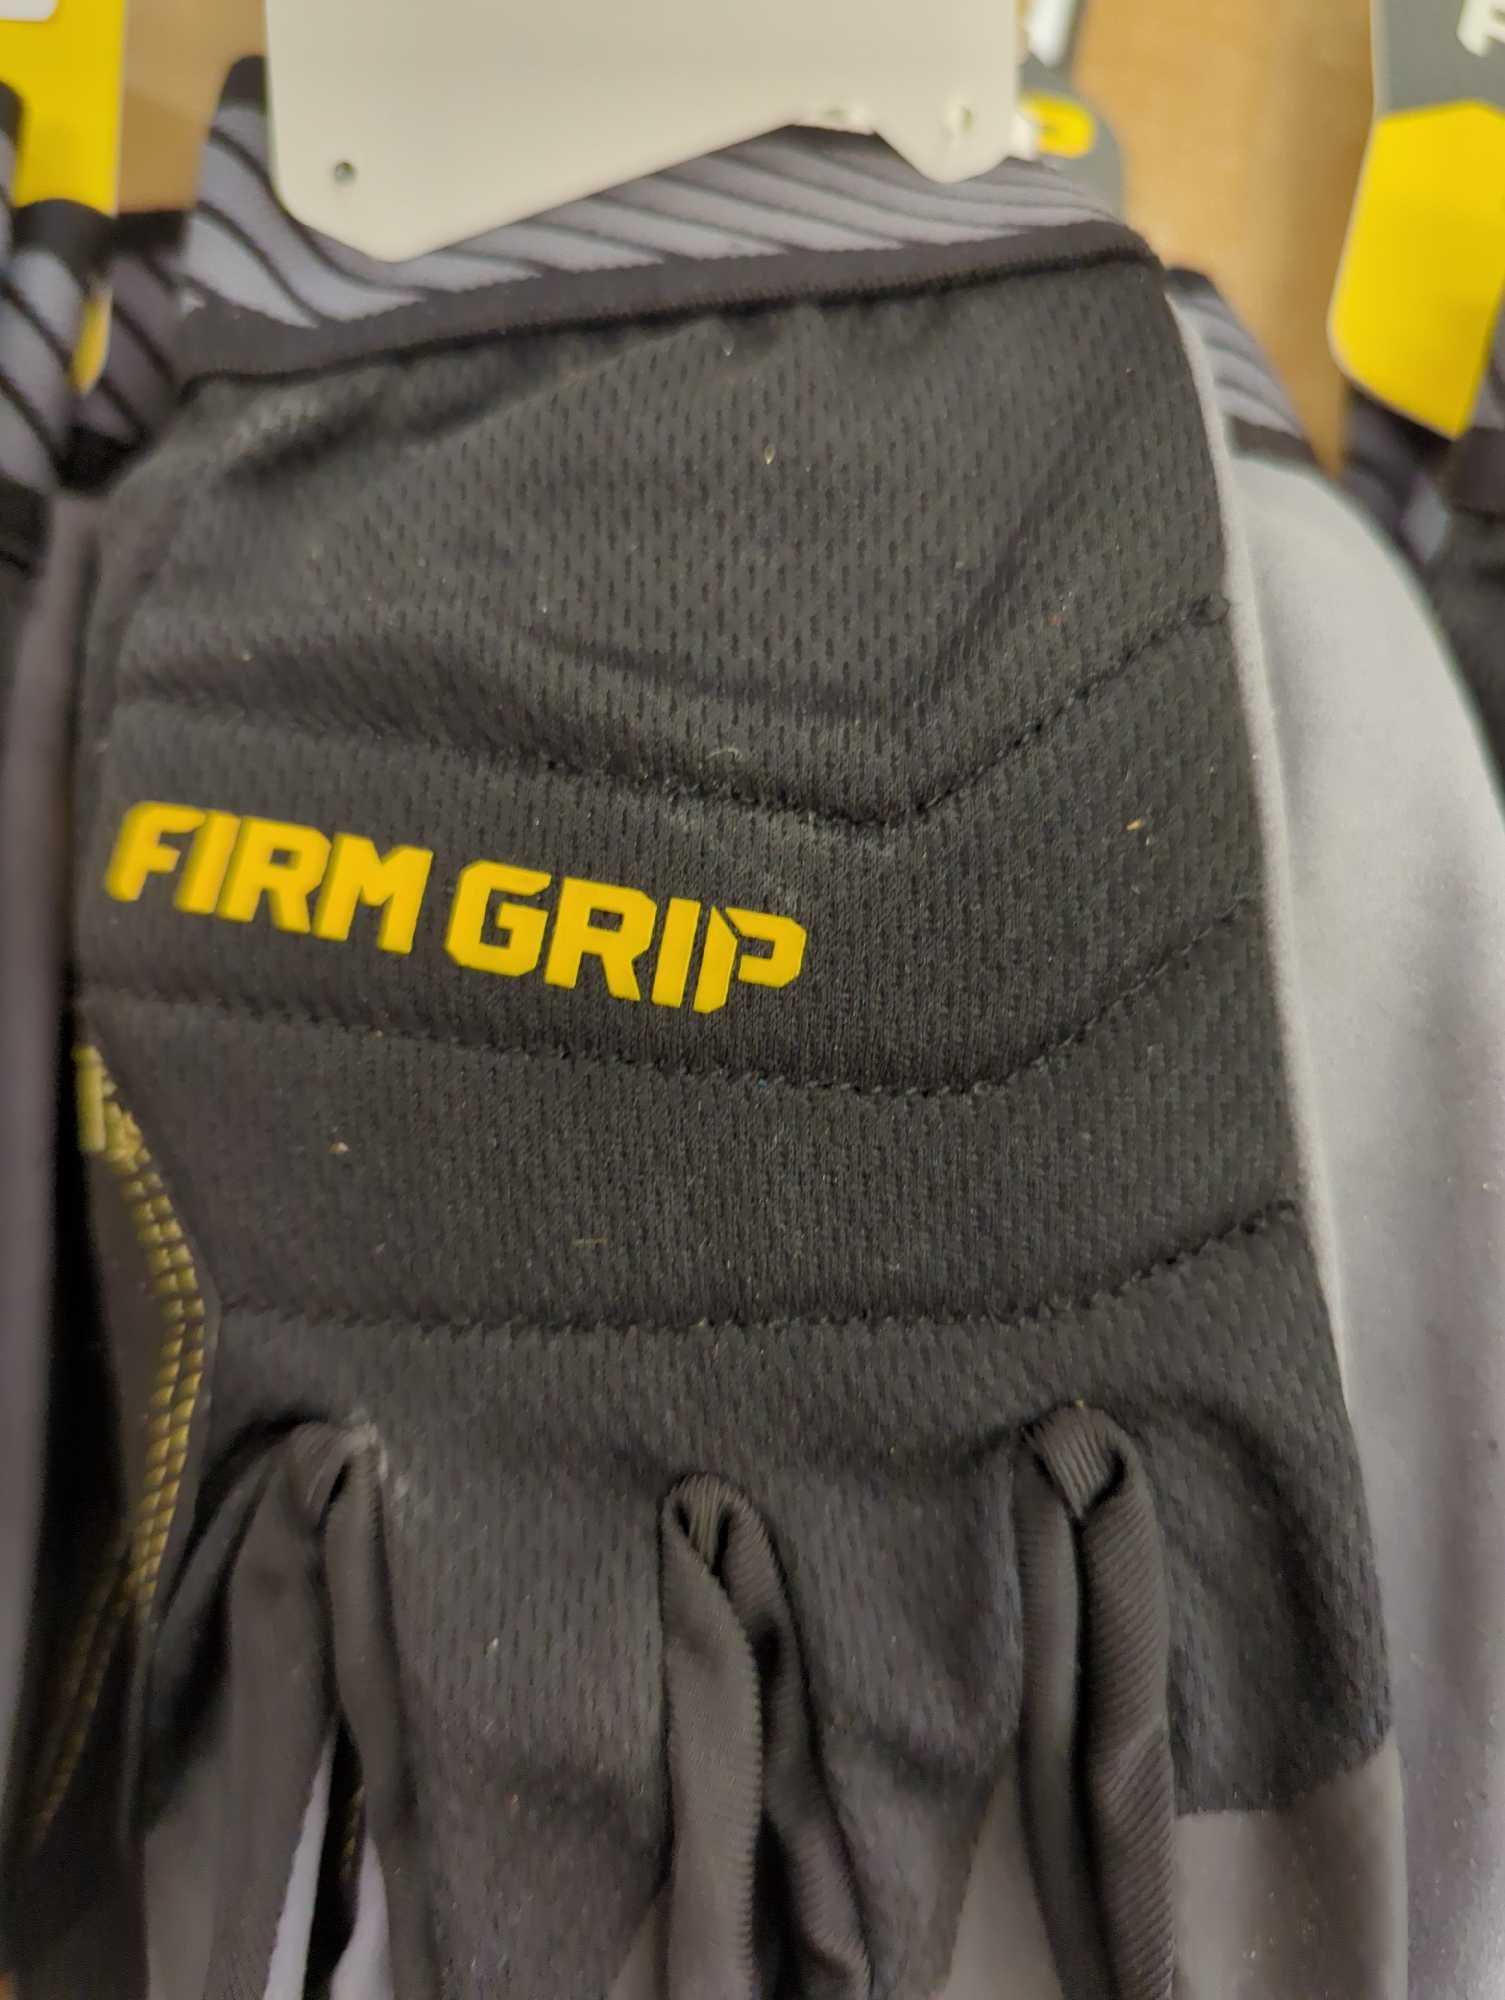 Lot of 3 Packs of FIRM GRIP Large Flex Cuff Outdoor and Work Gloves (2-Pack), Appears to be New